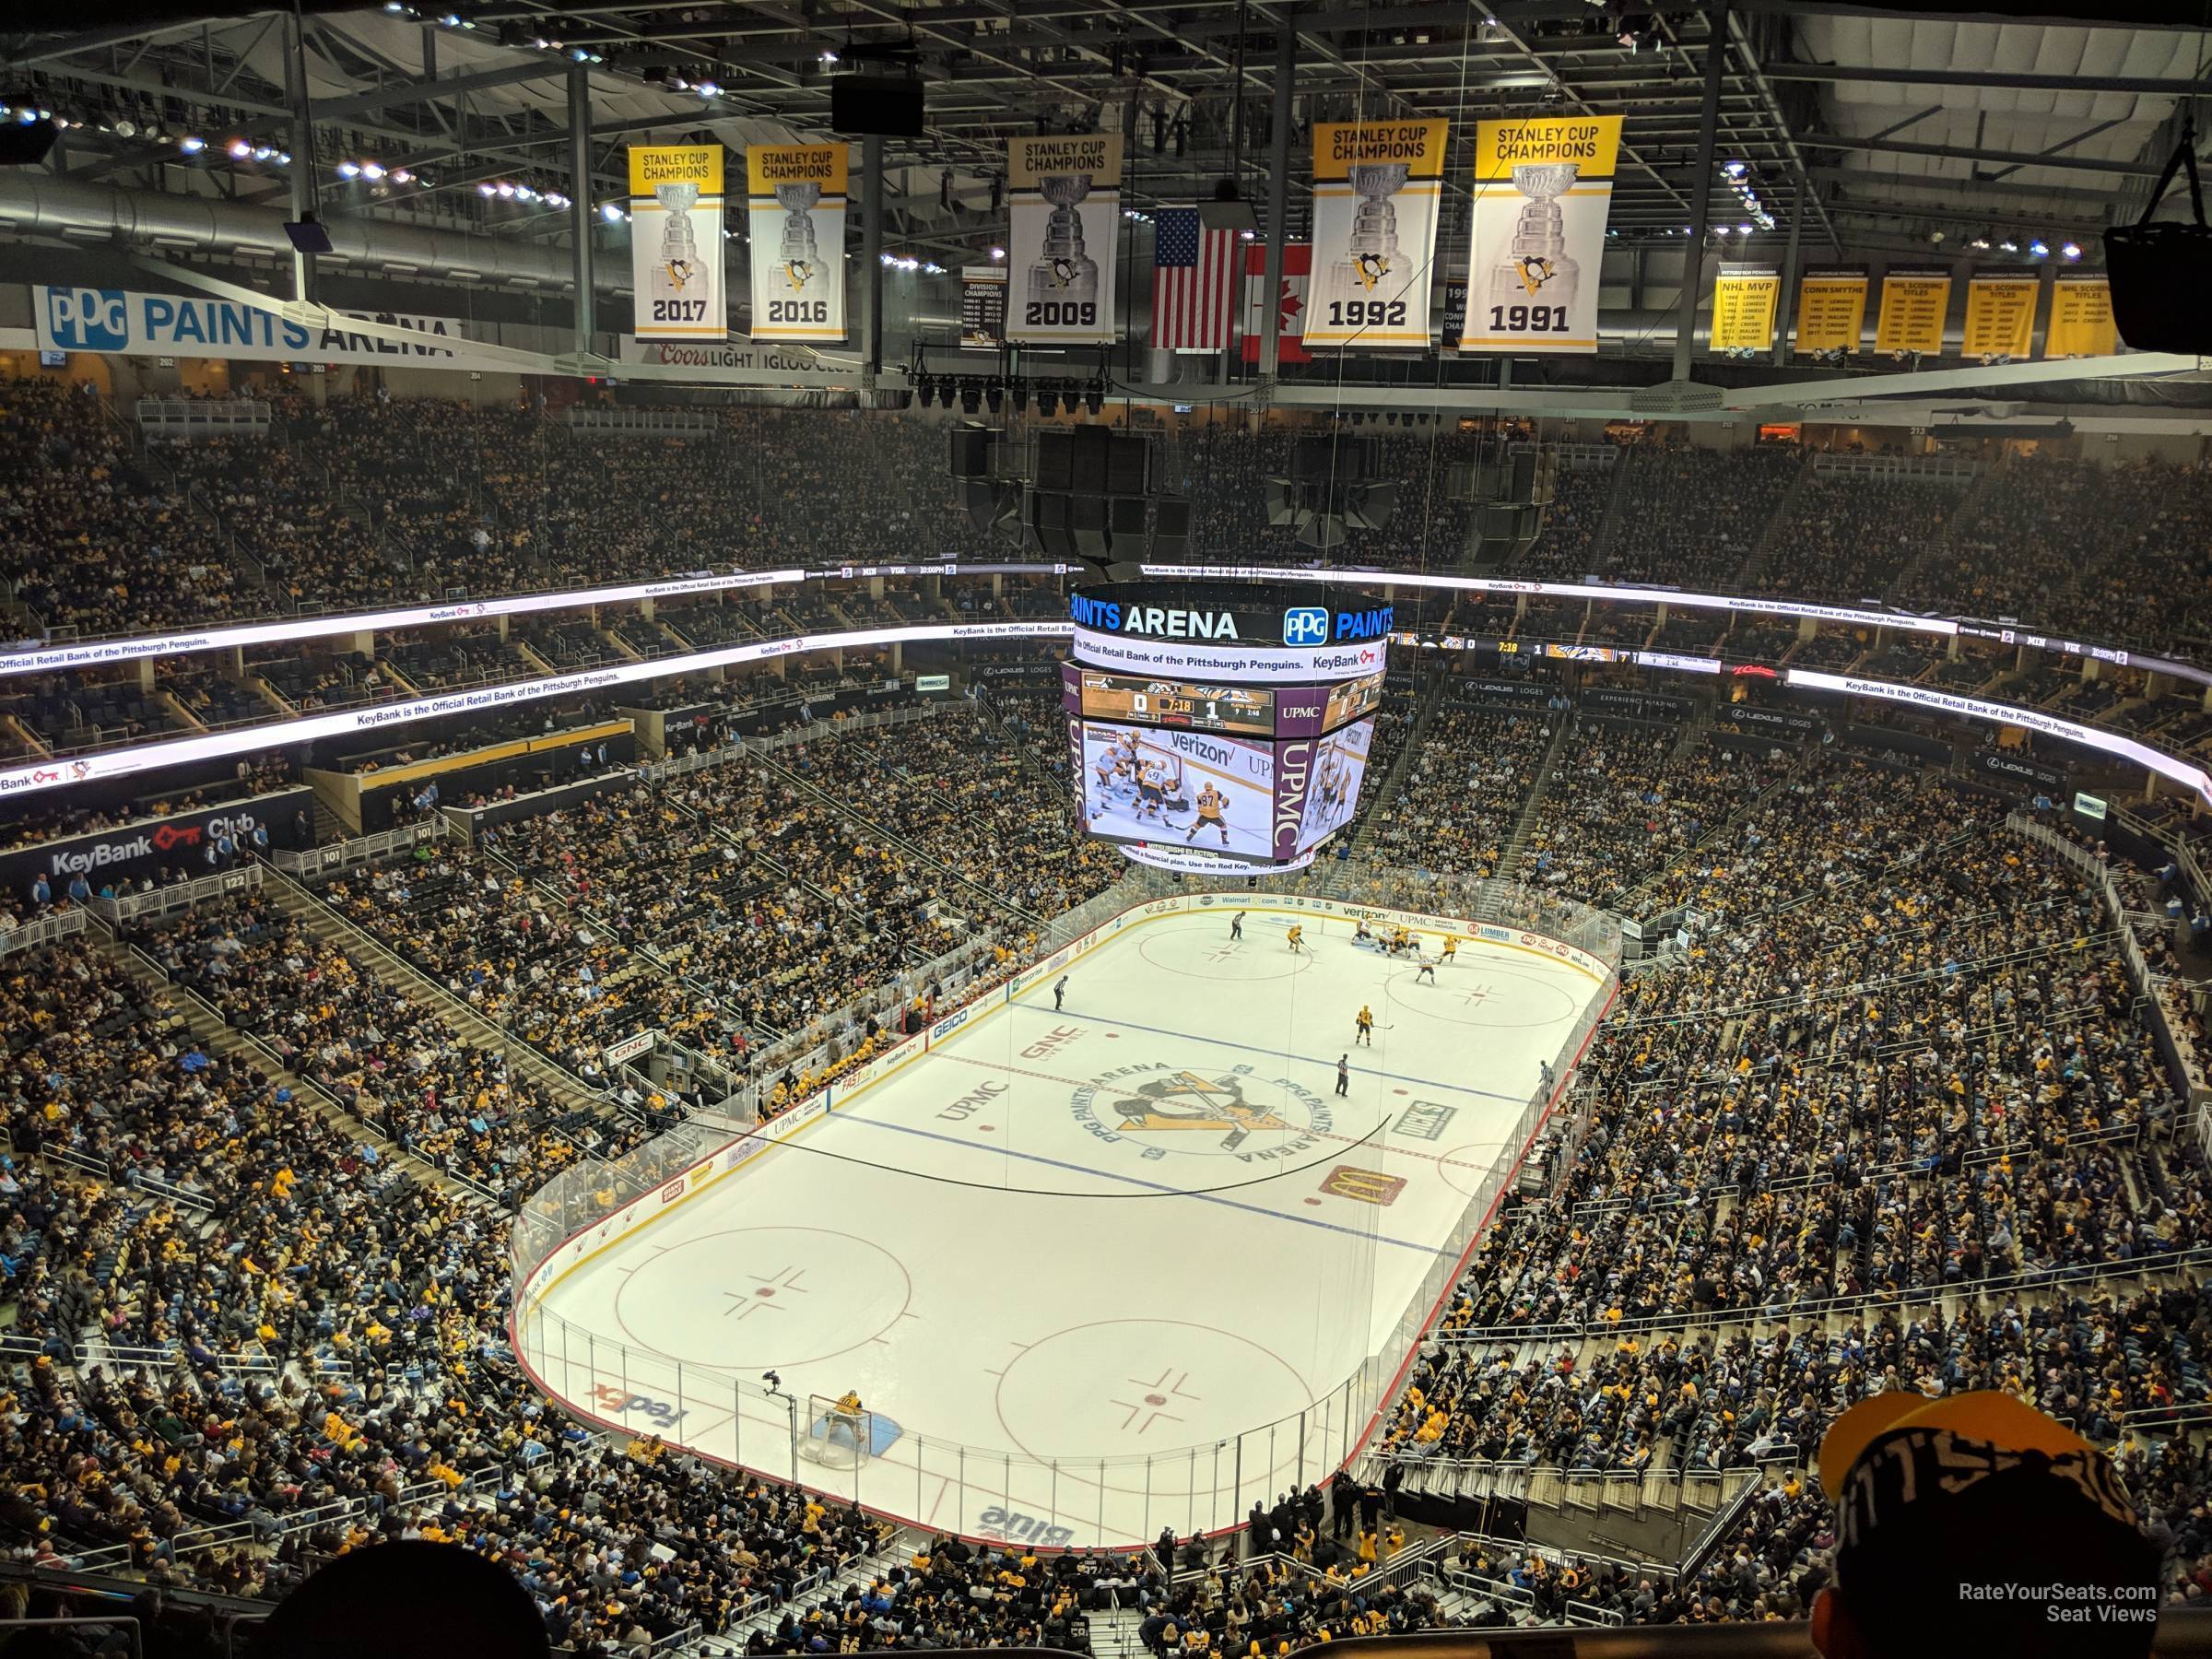 In Enemy Territory – A Road Review Of PPG Paints Arena